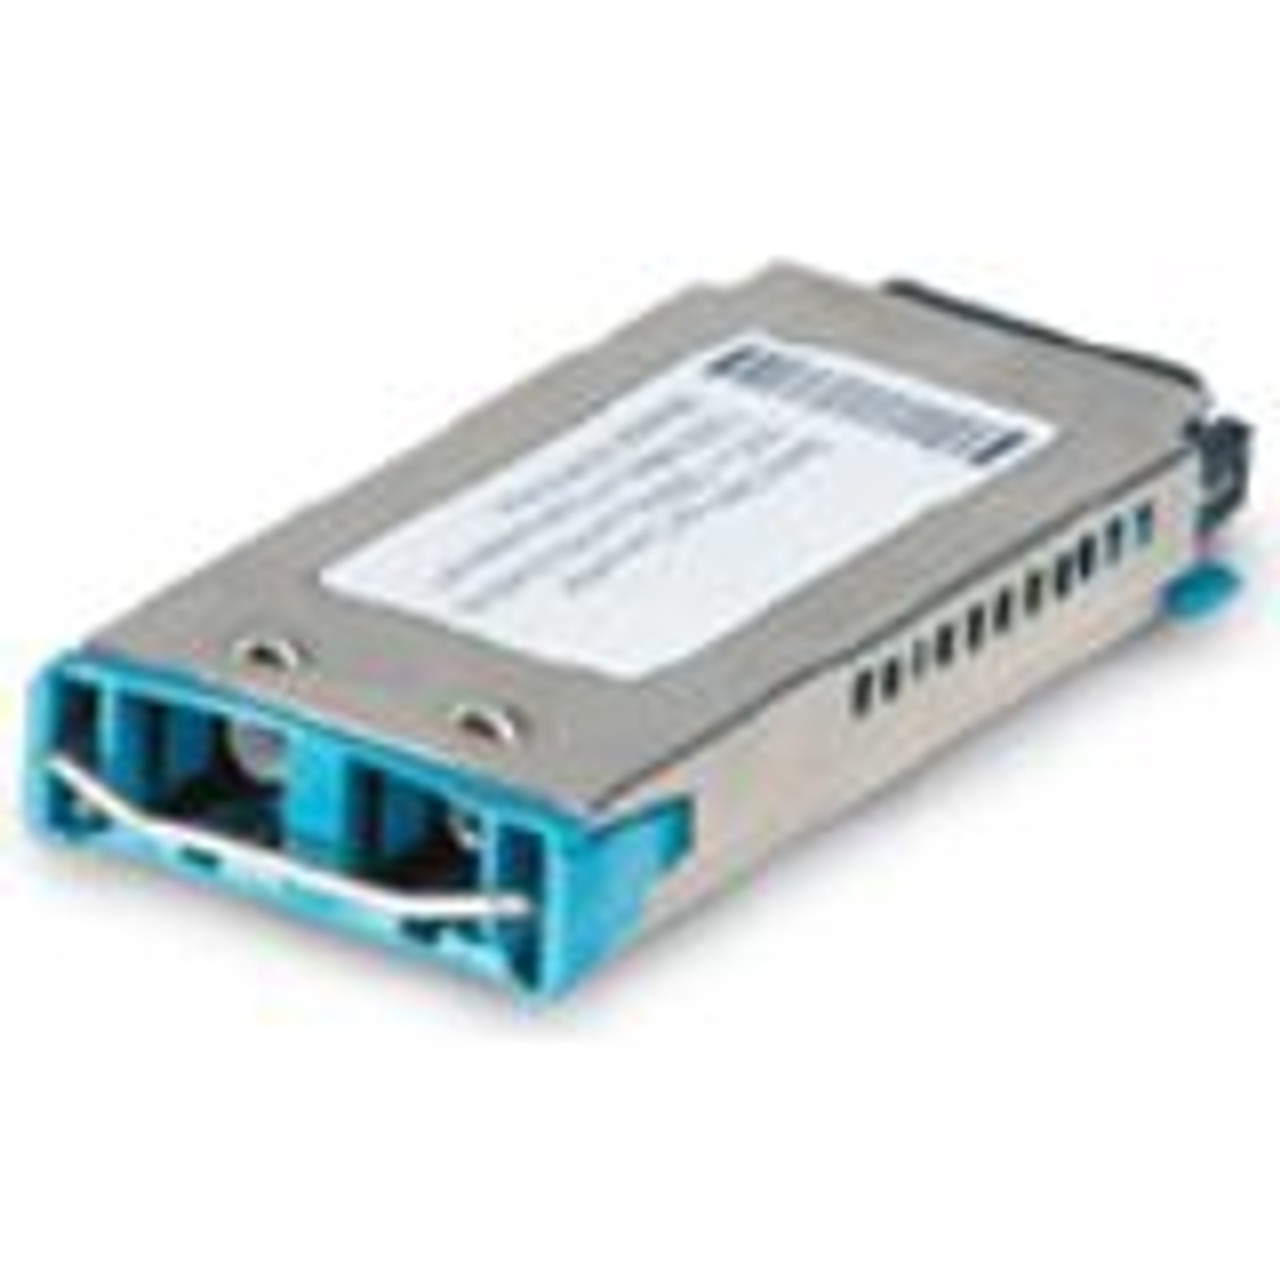 990-01999-00 Allied Telesis AT-G8ZX70 1.25Gbps 1000Base-ZX Single-mode Fiber 70km 1610nm SC Connector GBIC Transceiver Module